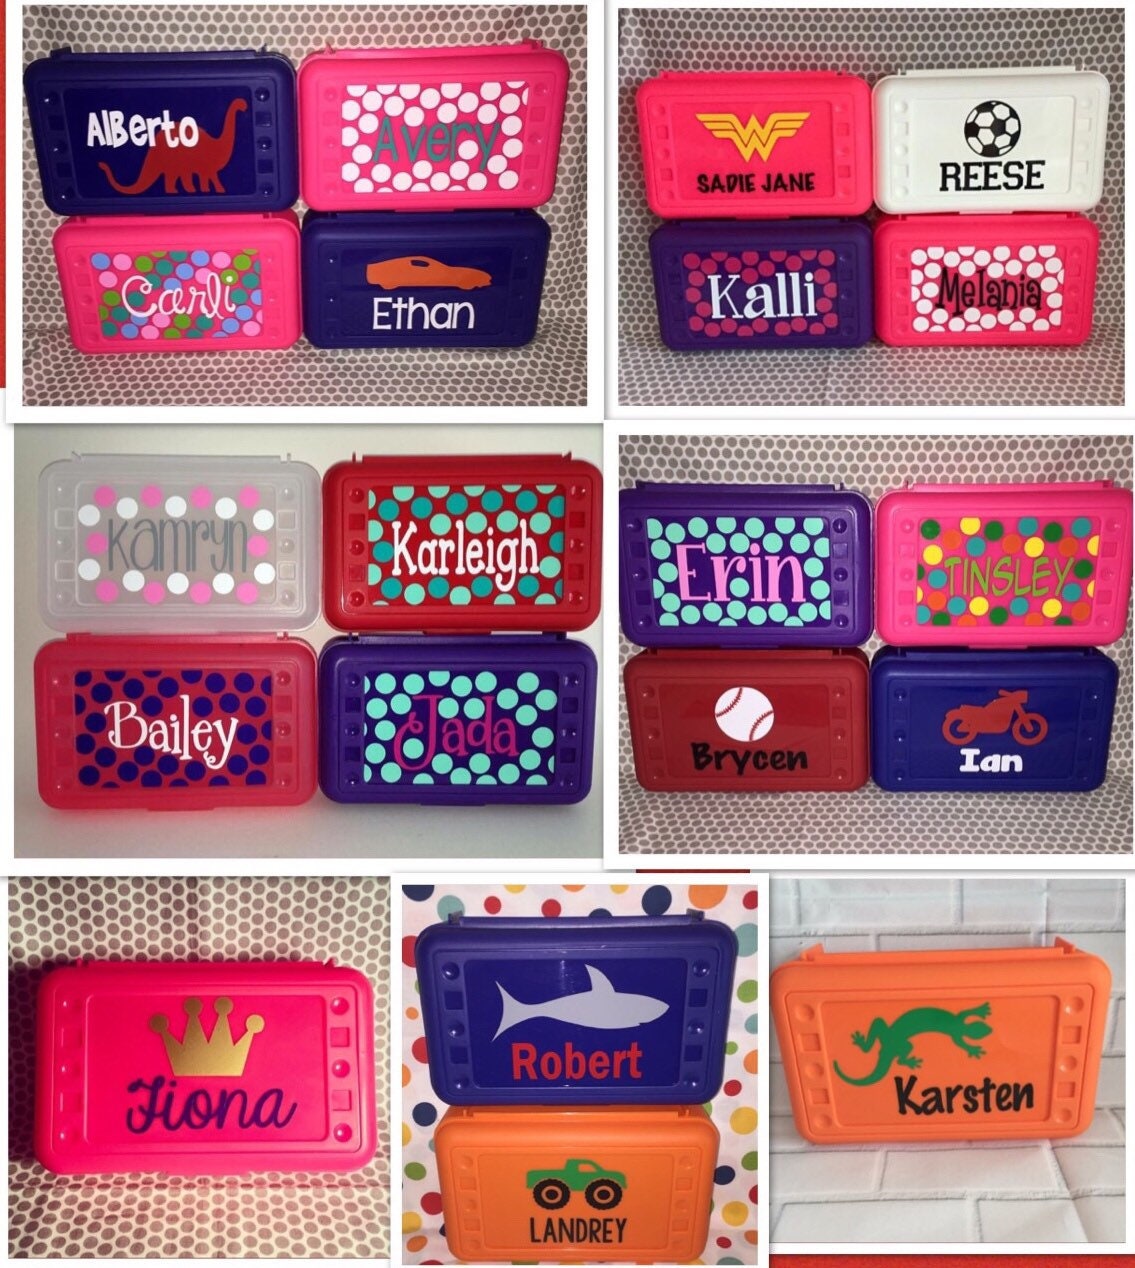 Personalized Pencil Box Organizer – The Color of Whimsy